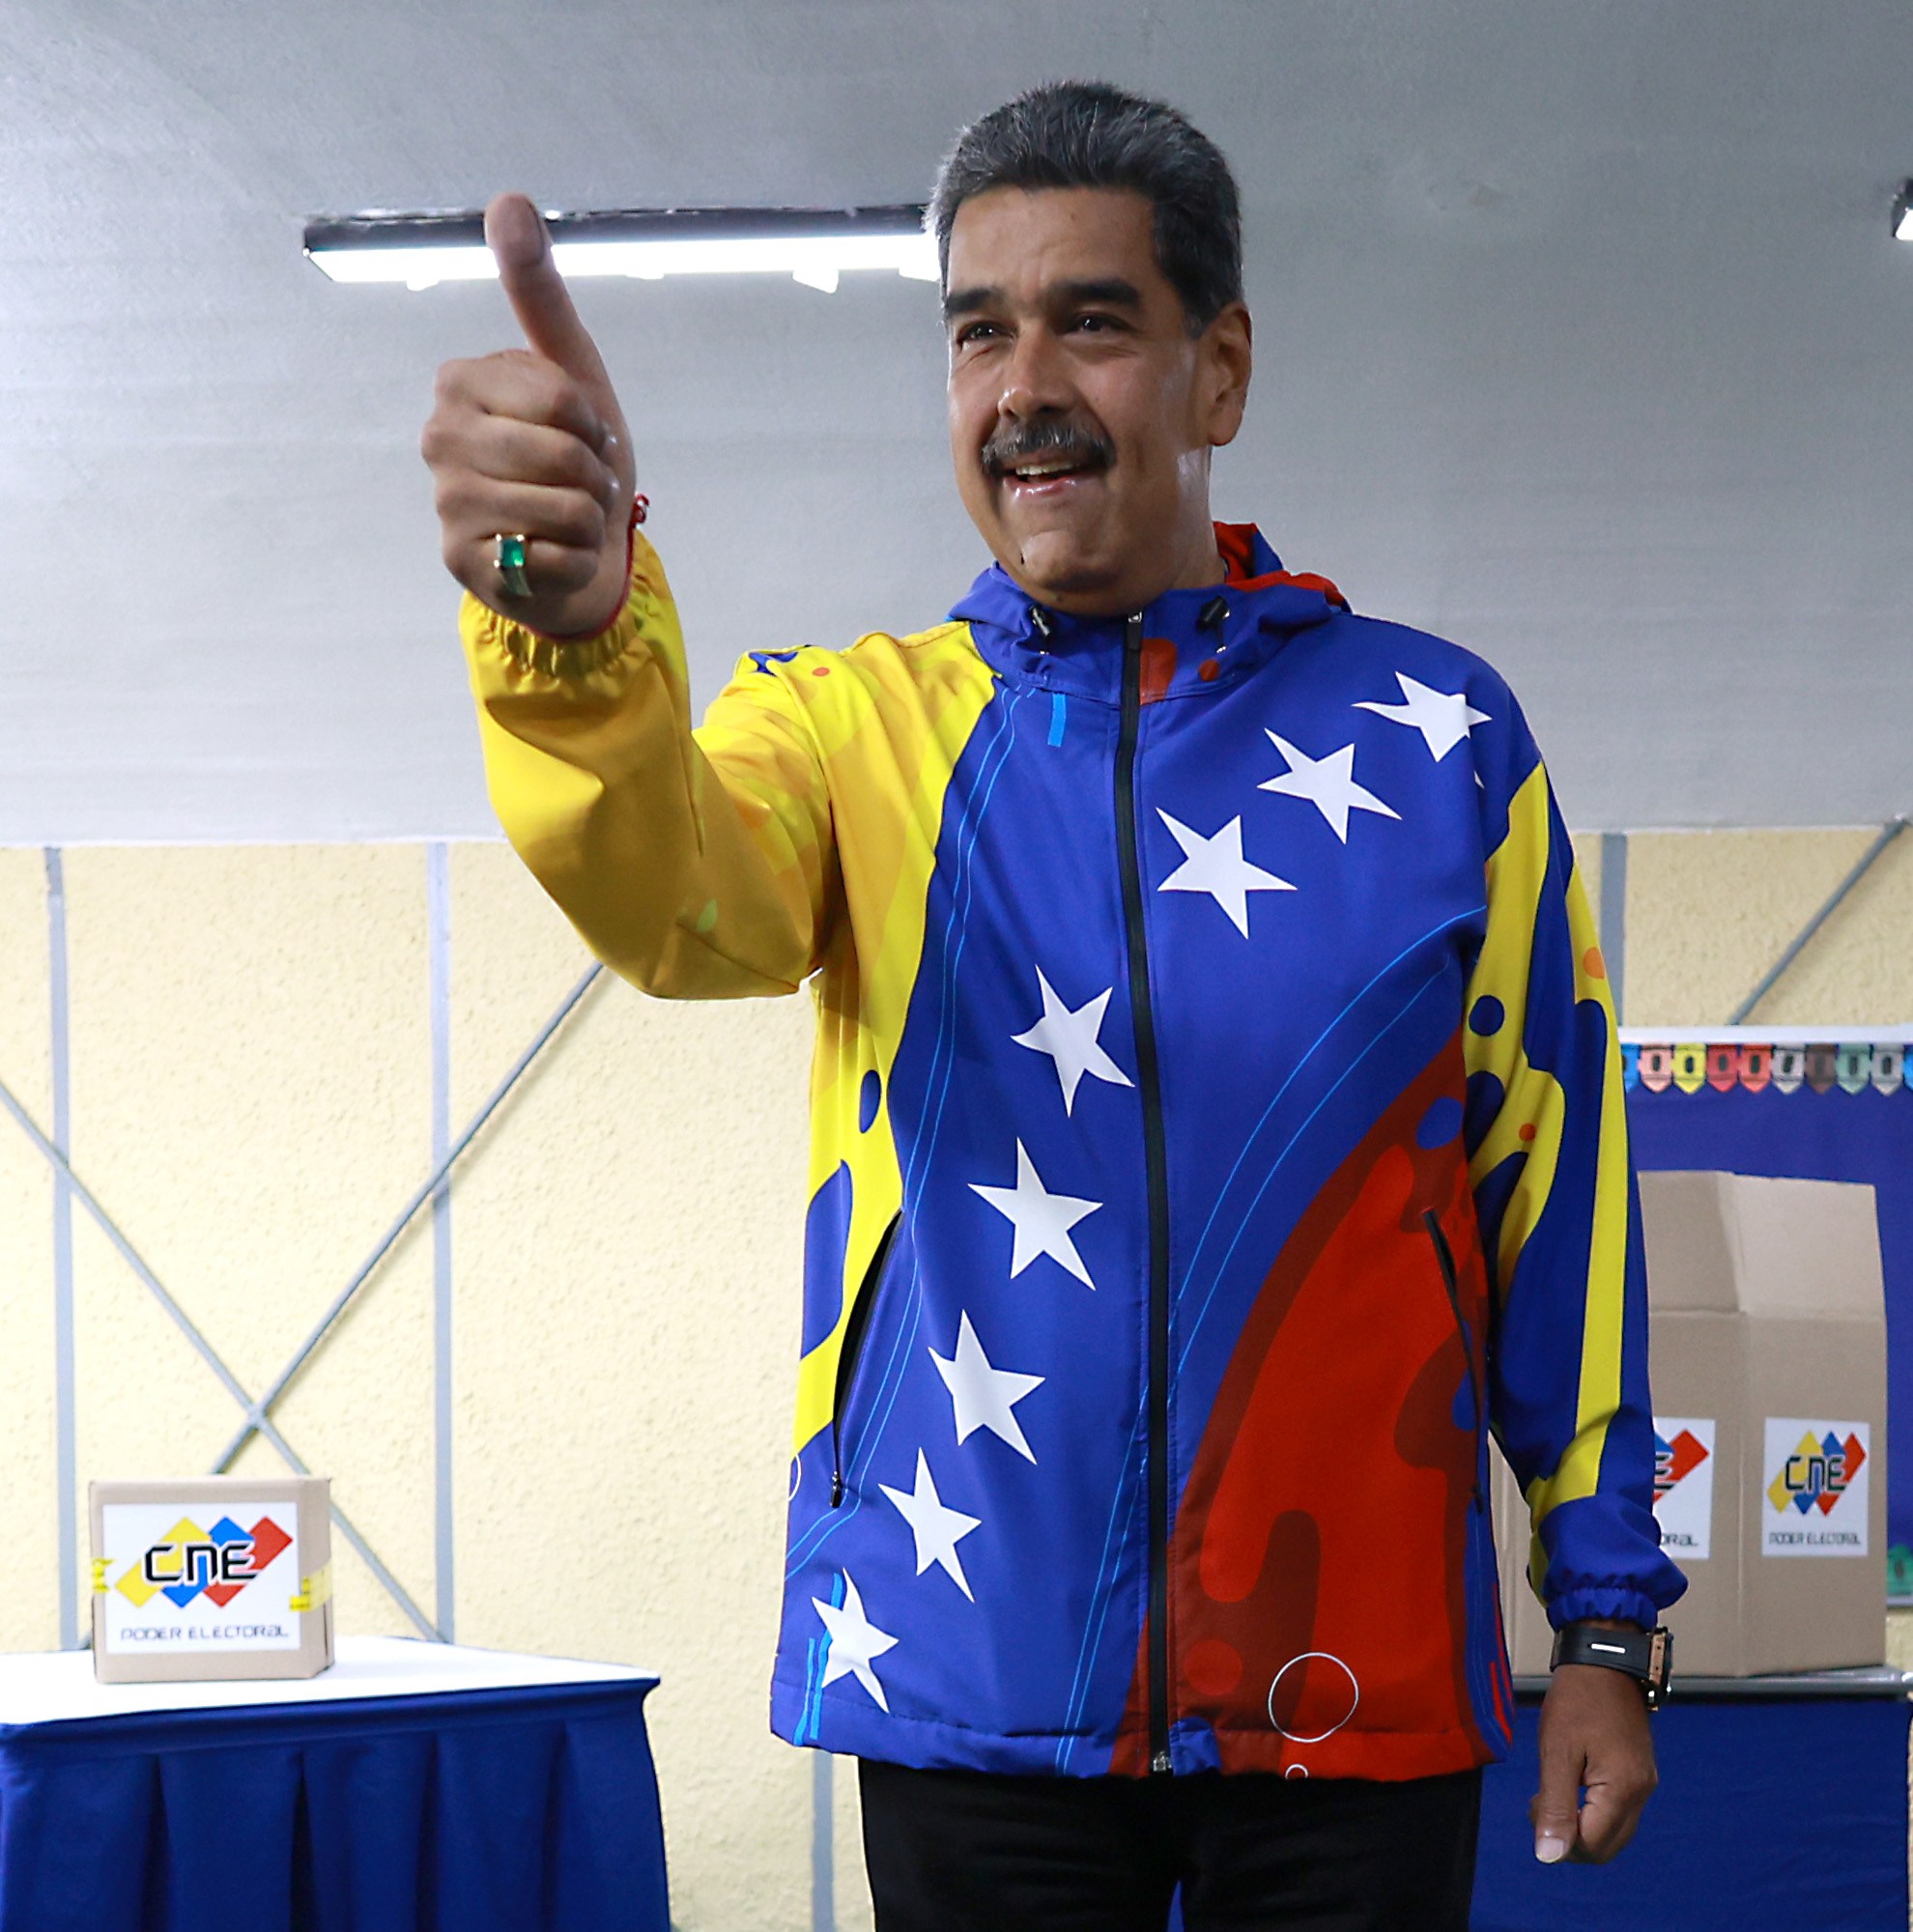 Venezuela’s Maduro just tightened his grip on power. What comes next?